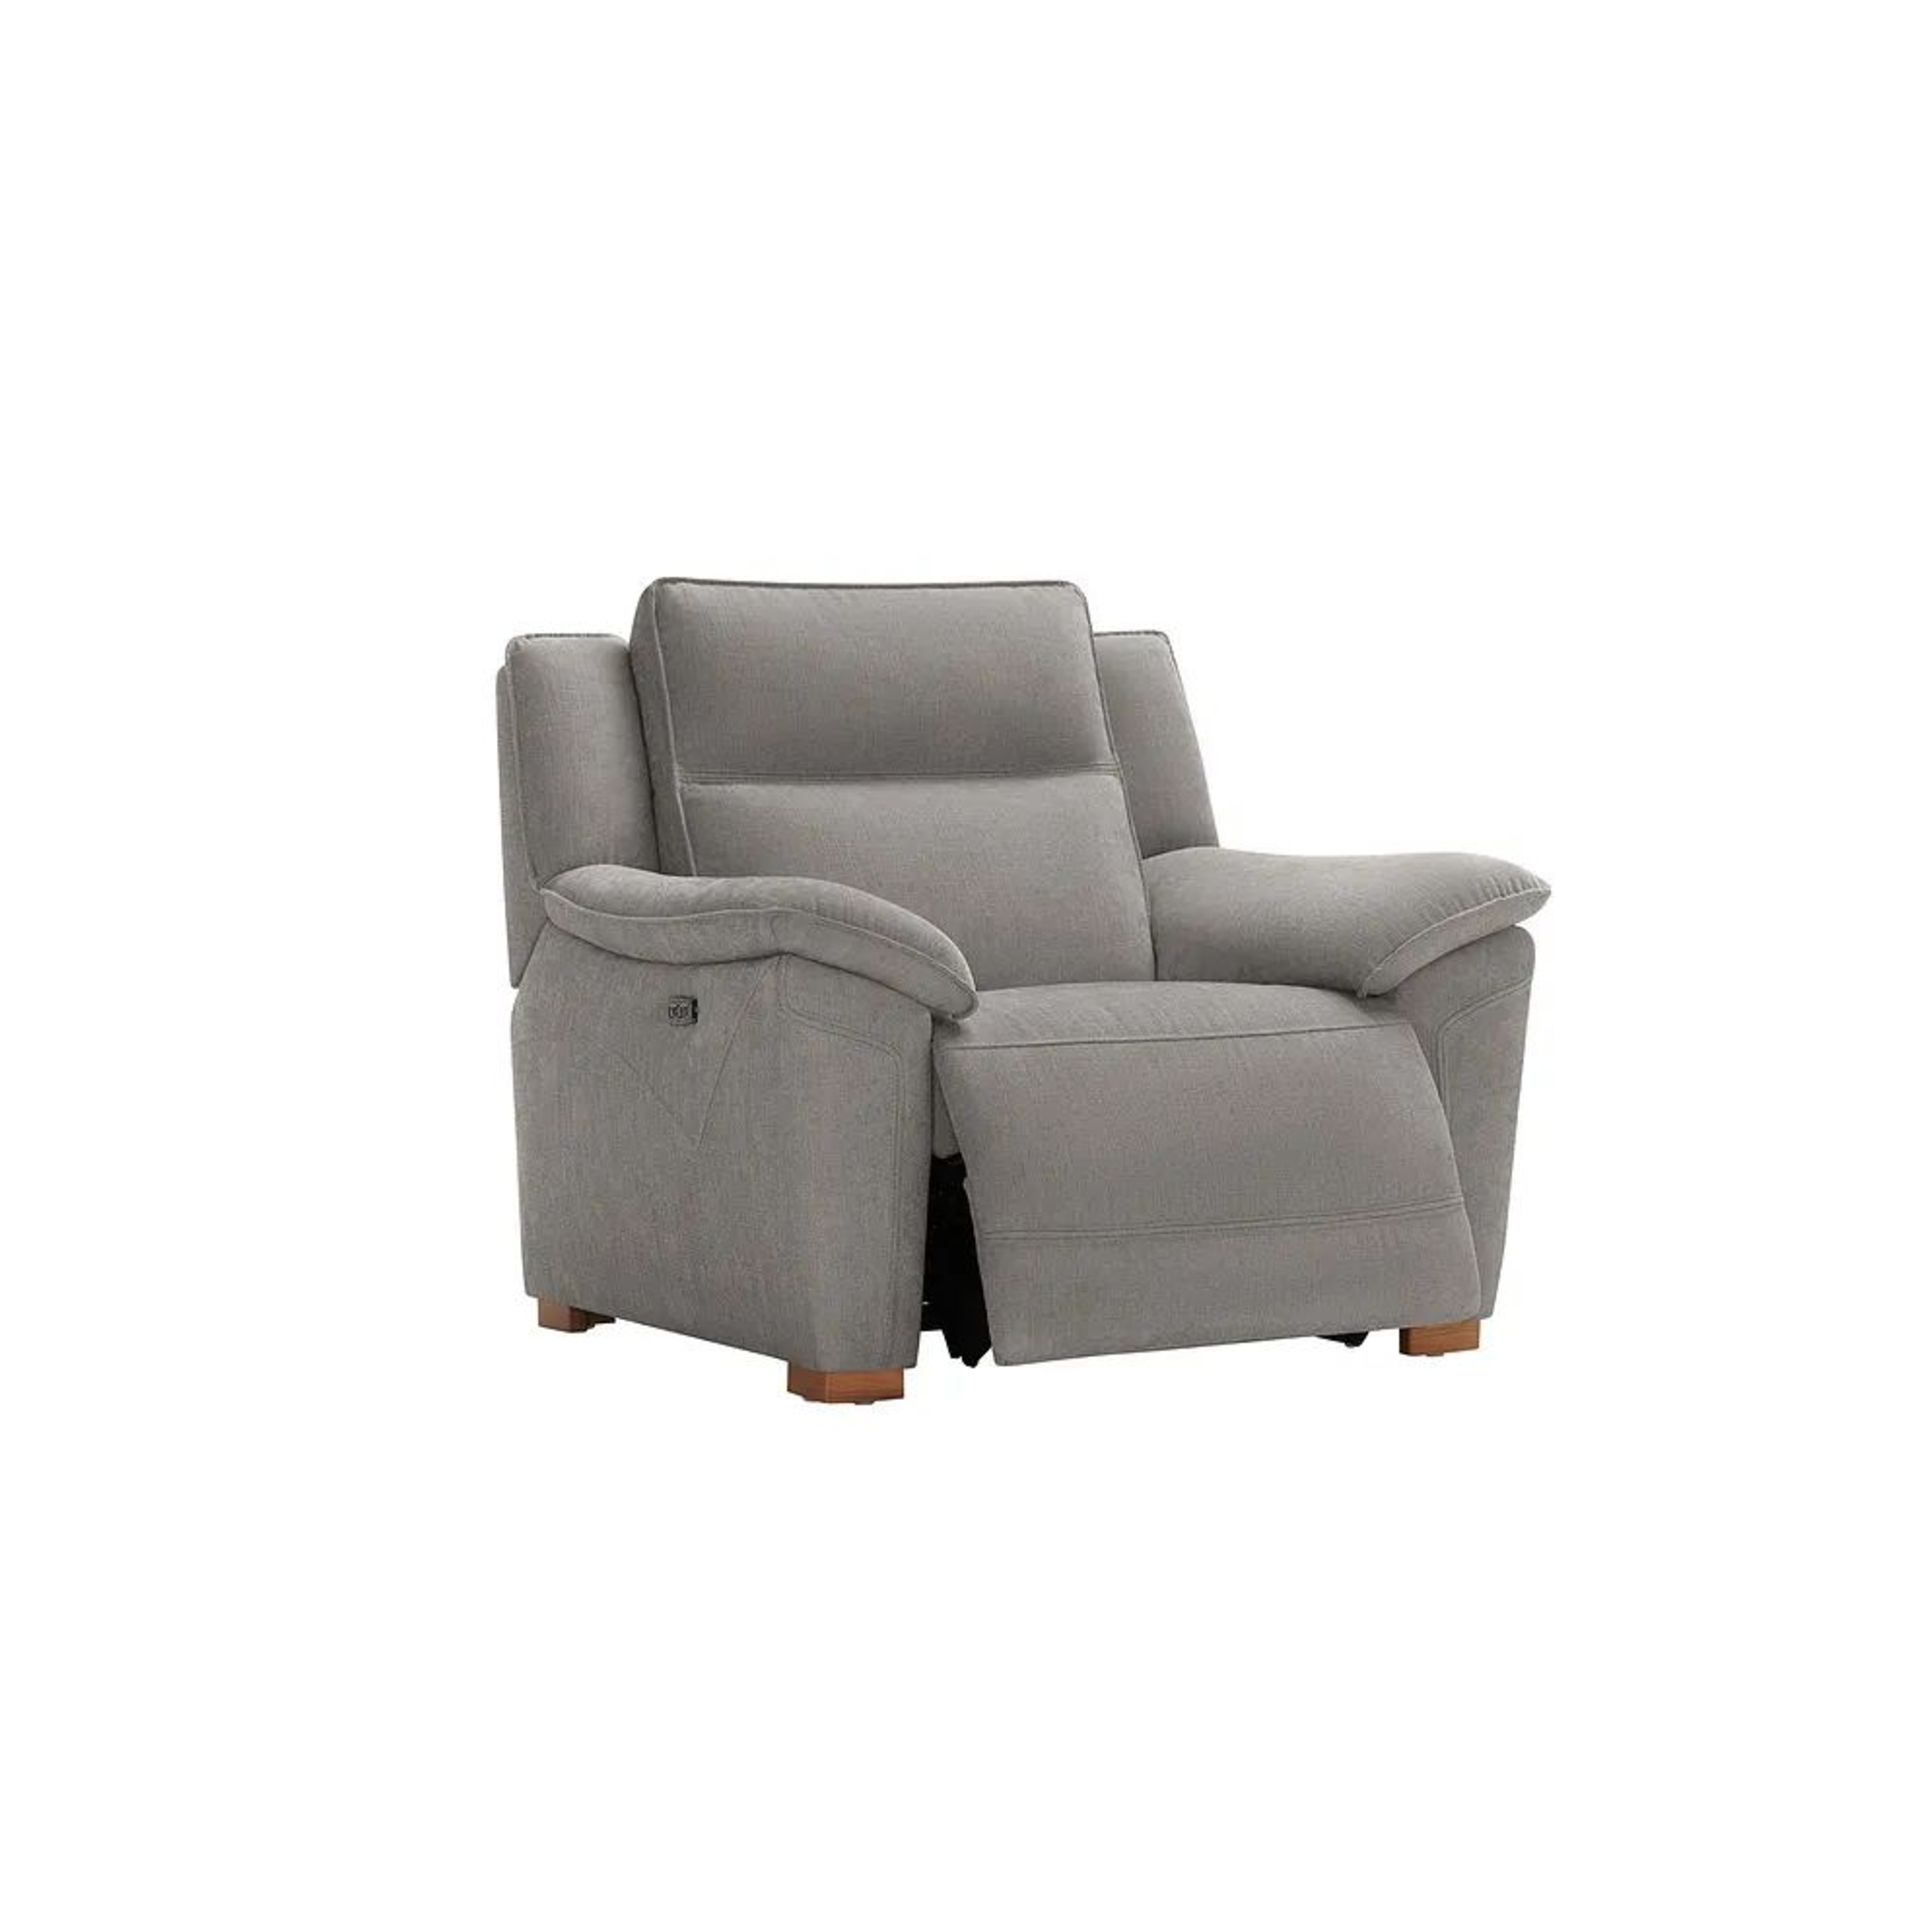 BRAND NEW DUNE Electric Recliner Armchair with Power Headrest - AMIGO GRANITE FABRIC. RRP £1099. - Image 3 of 12